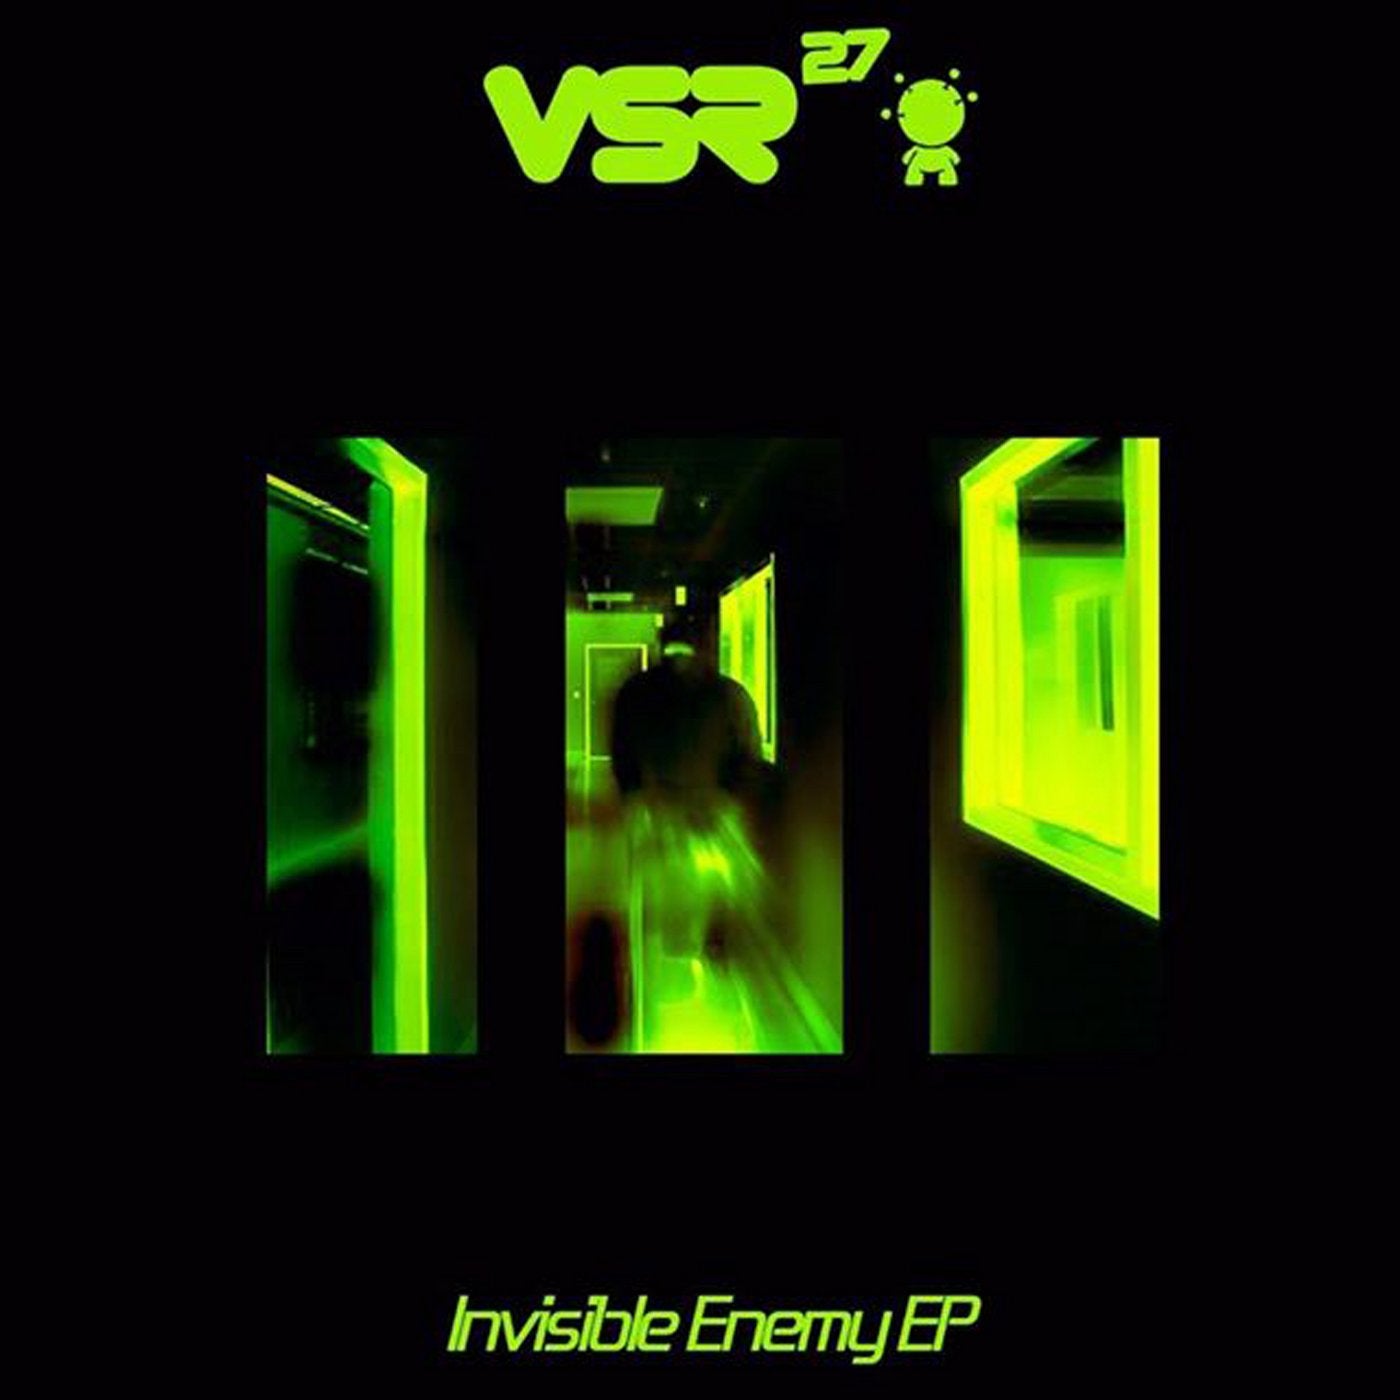 Invisible Enemy EP